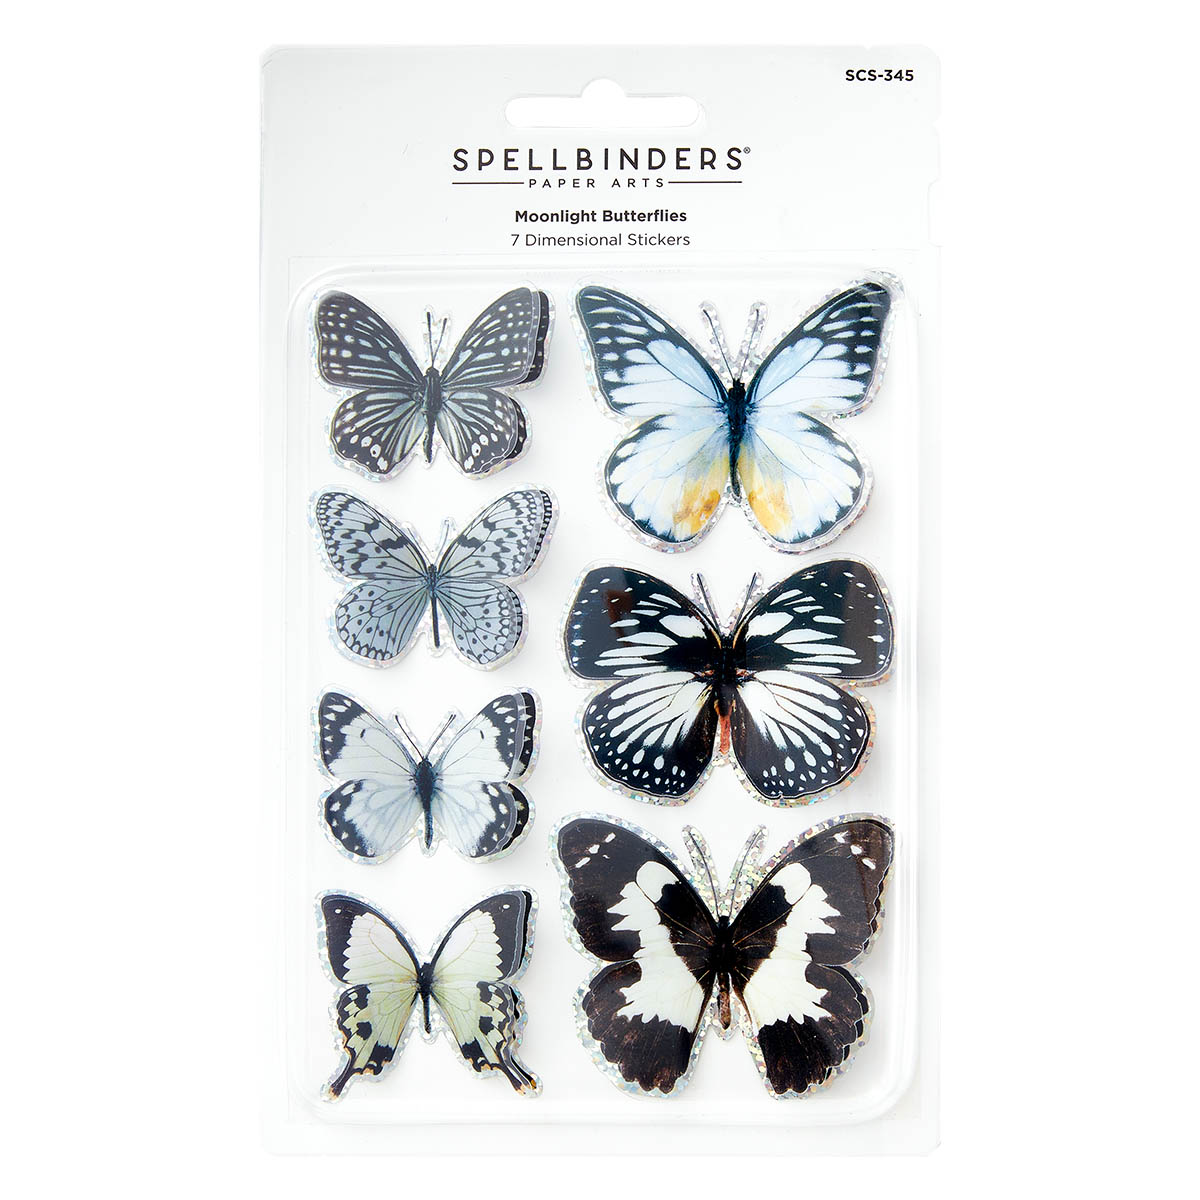 Spellbinders Moonlight Butterflies Stickers From the Timeless Collection